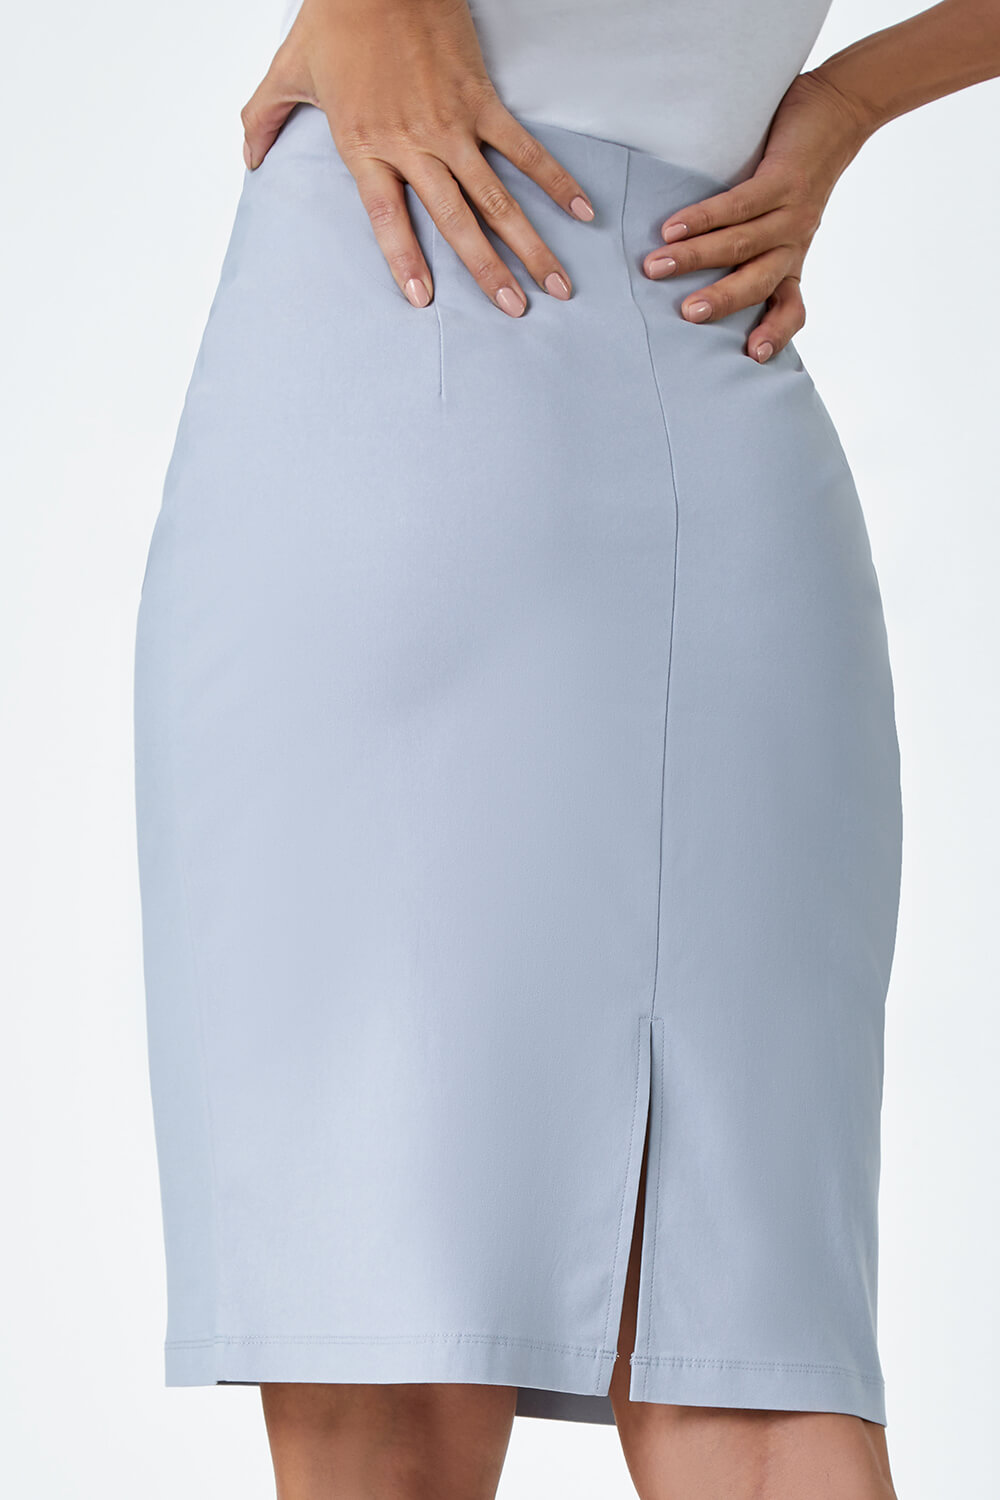 Silver Pull On Stretch Pencil Skirt, Image 5 of 5